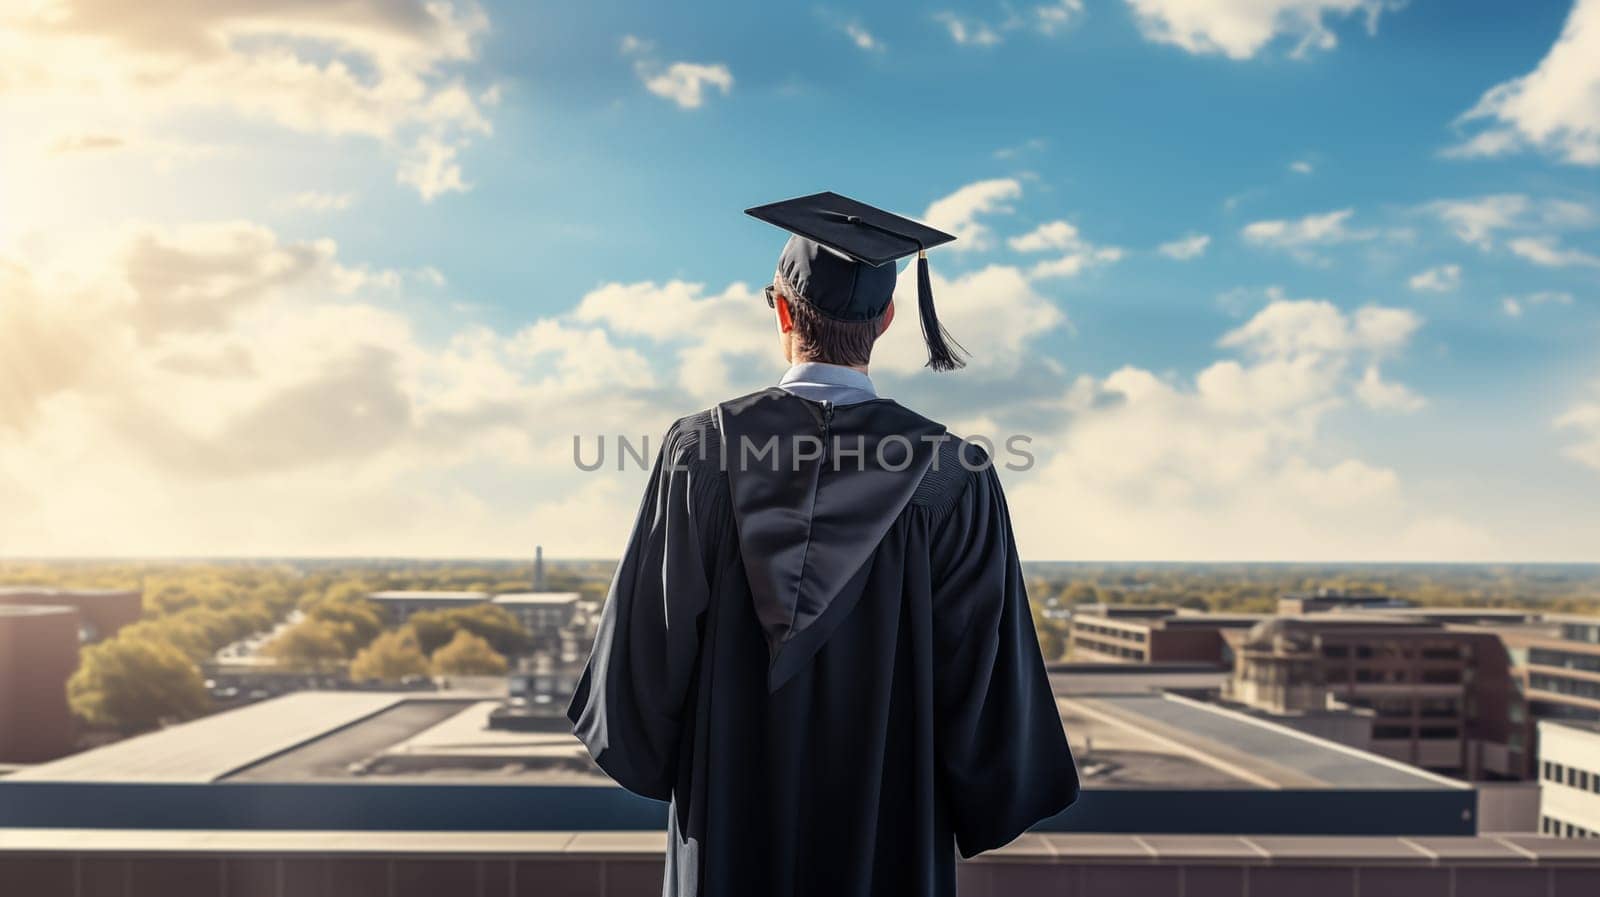 A rear view of a graduate standing outdoors against a background of blue sky, on a hill.